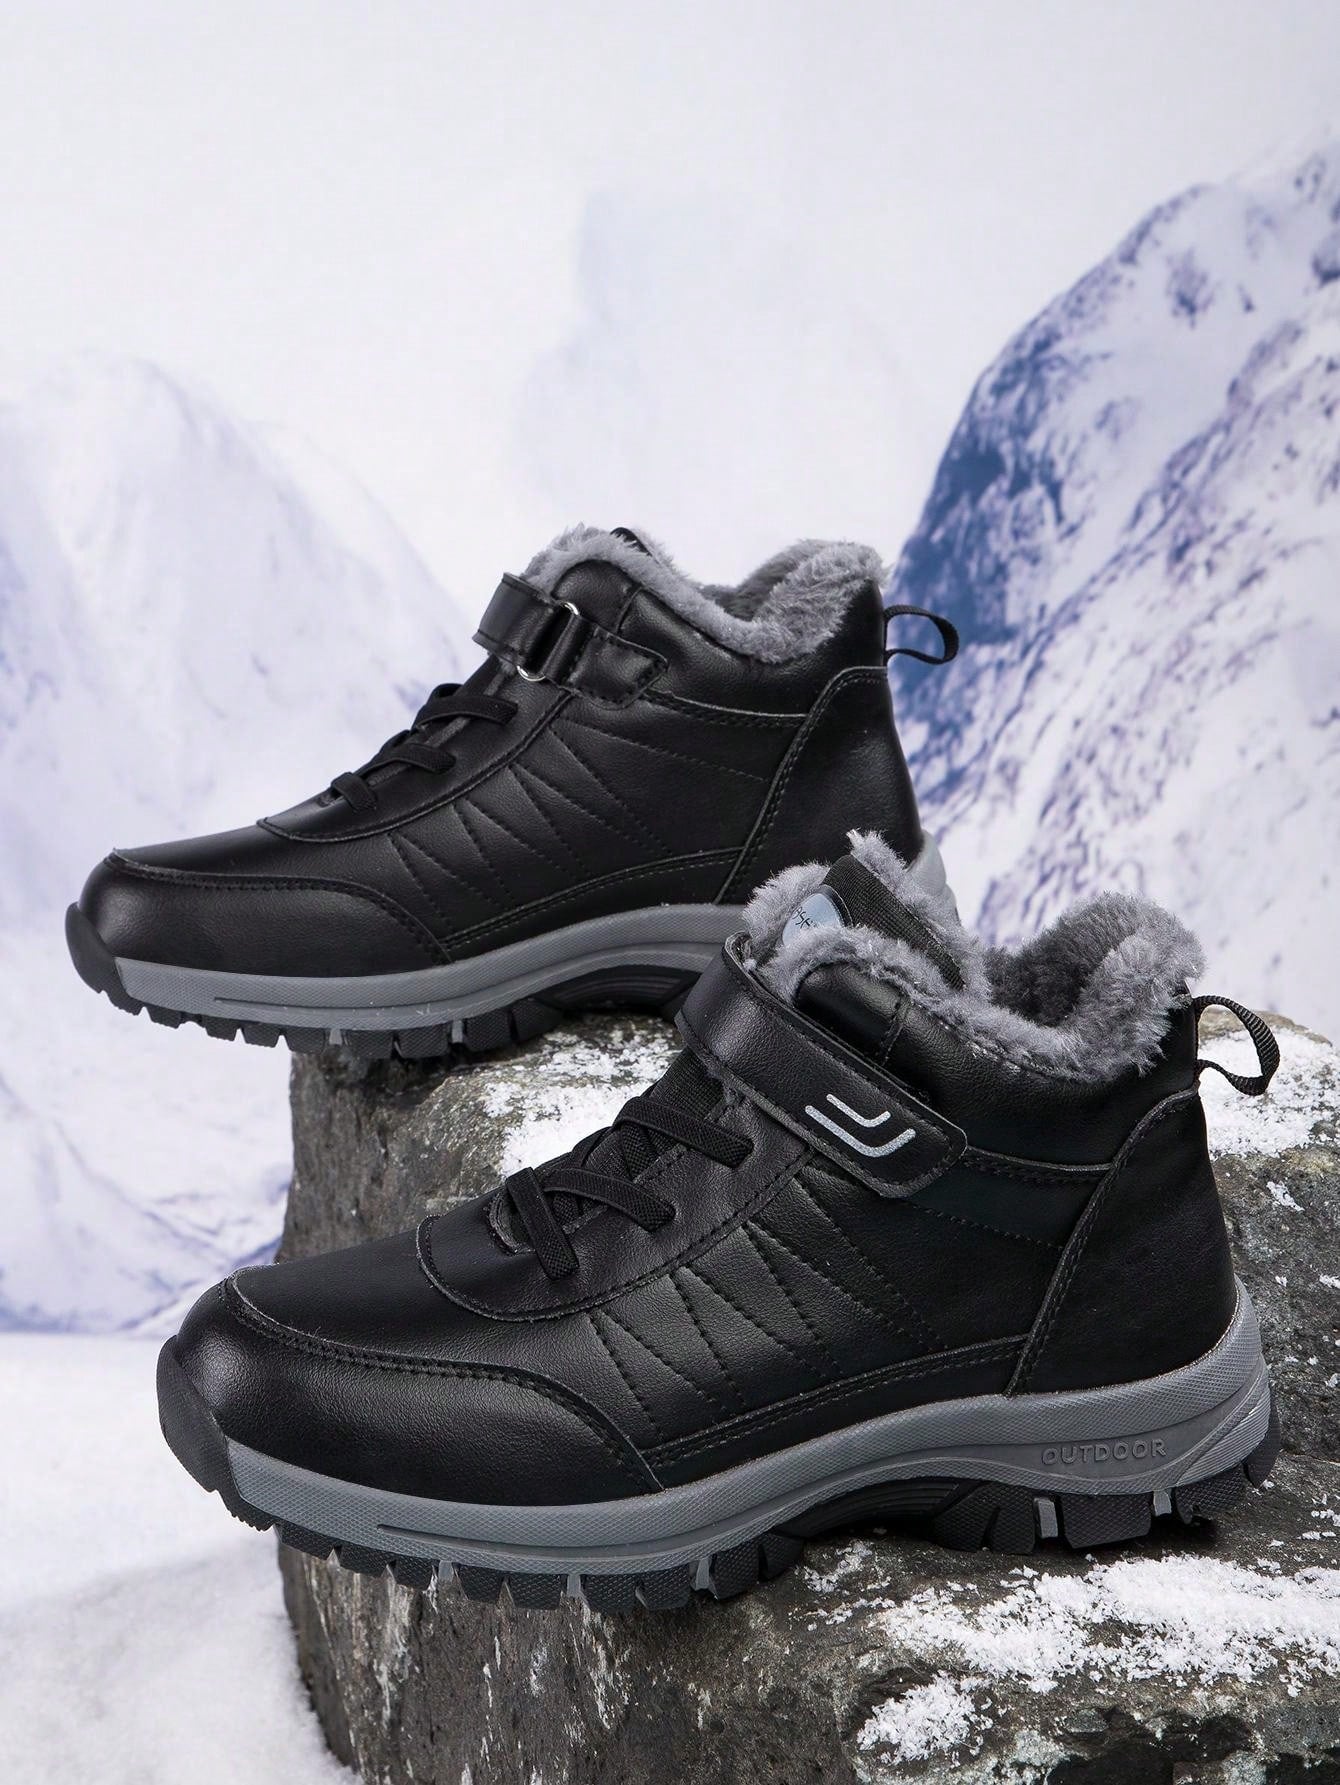 Men's Black Warm Winter Snow Boots With Velvet Lining, Non-slip, Outdoor Leisure, Comfortable And Versatile, Suitable For Daily Wear, Hiking, High-top Boots